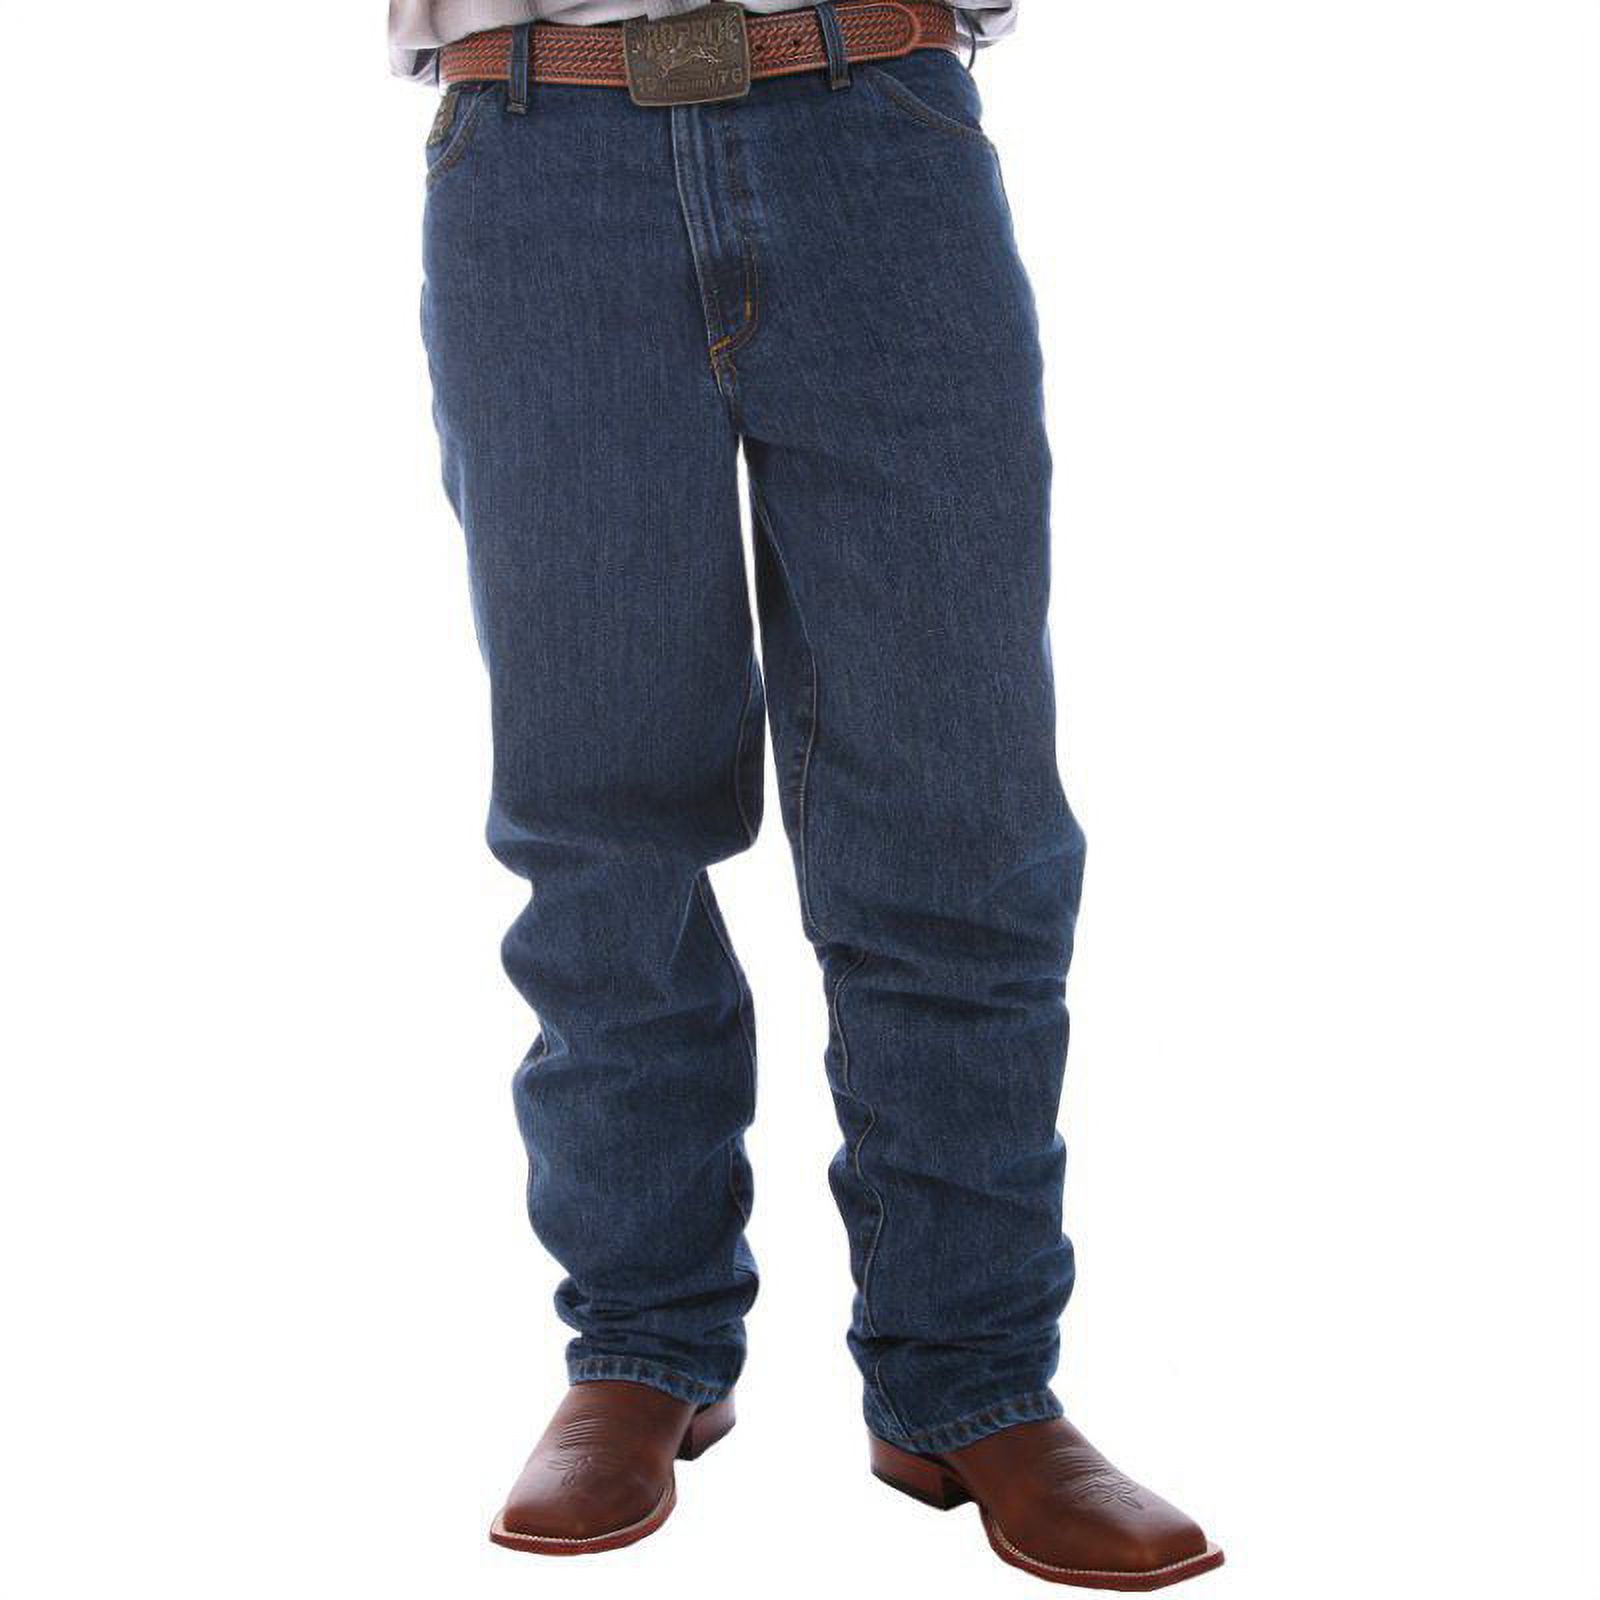 Cinch Men's Green Label Relaxed Fit Dark Stonewash Jeans Dark Stone 28W x 32L  US - image 2 of 4